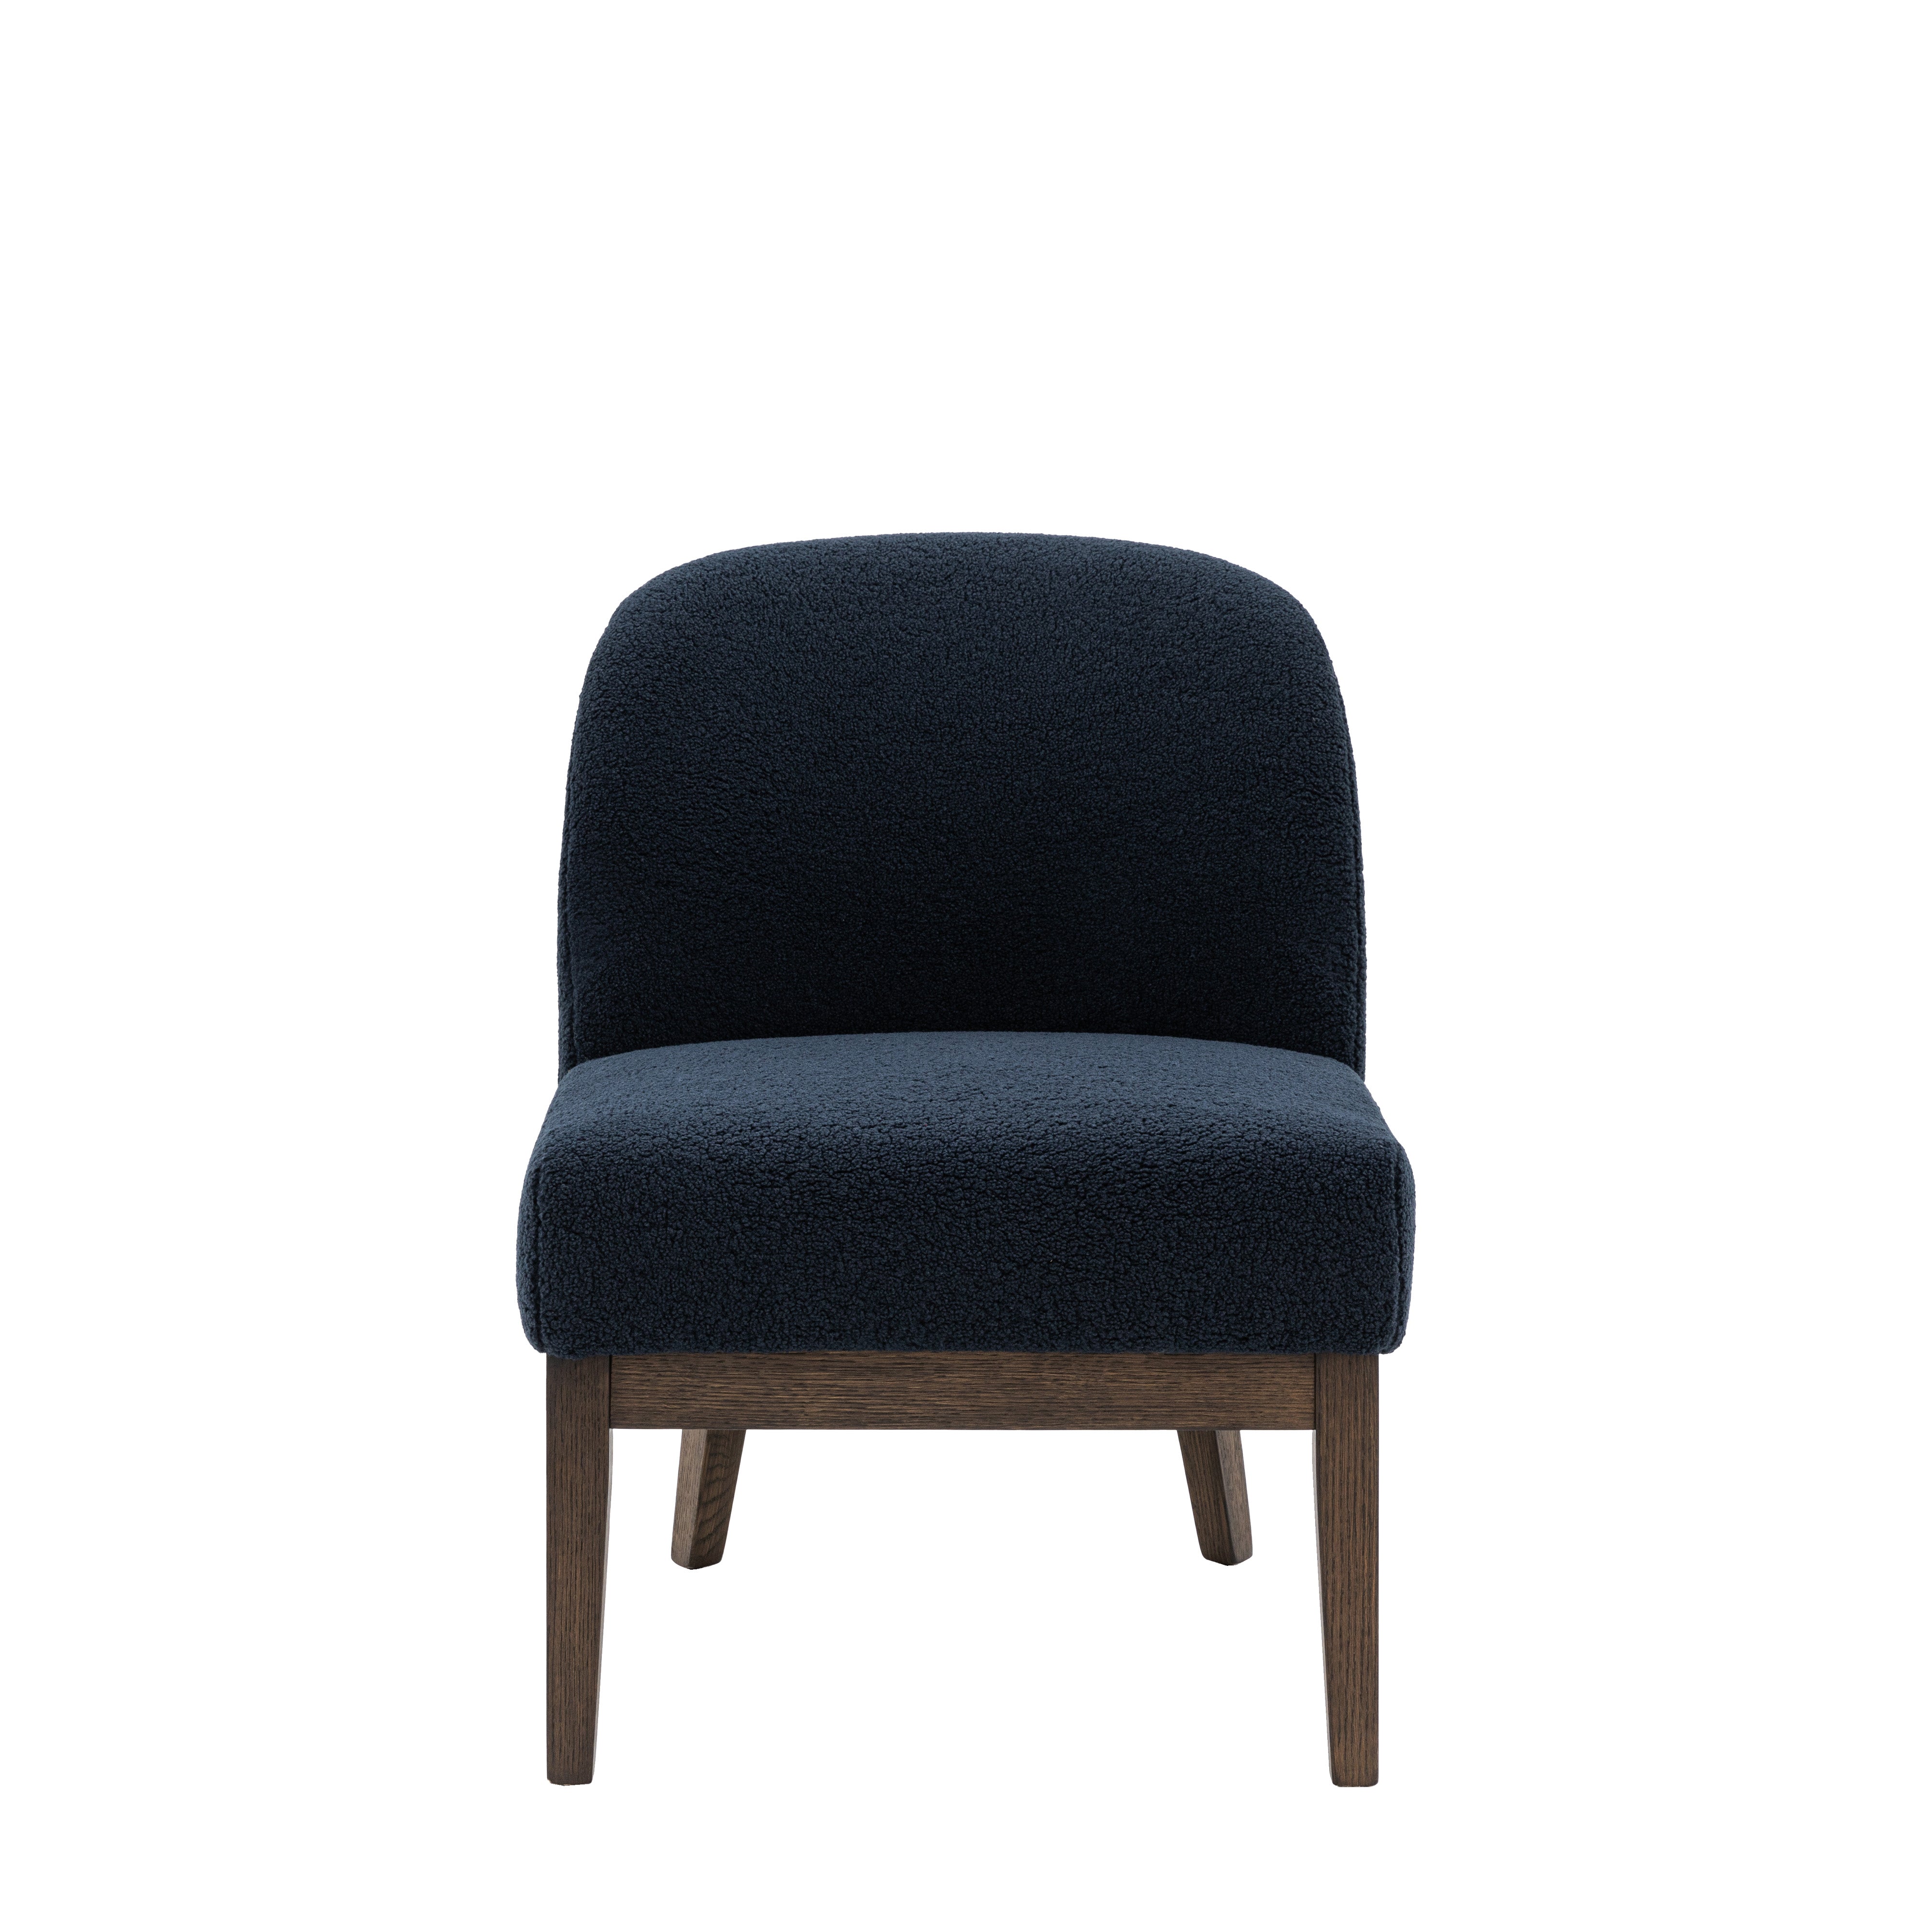 Bardfield Chair - Blue - hus & co.